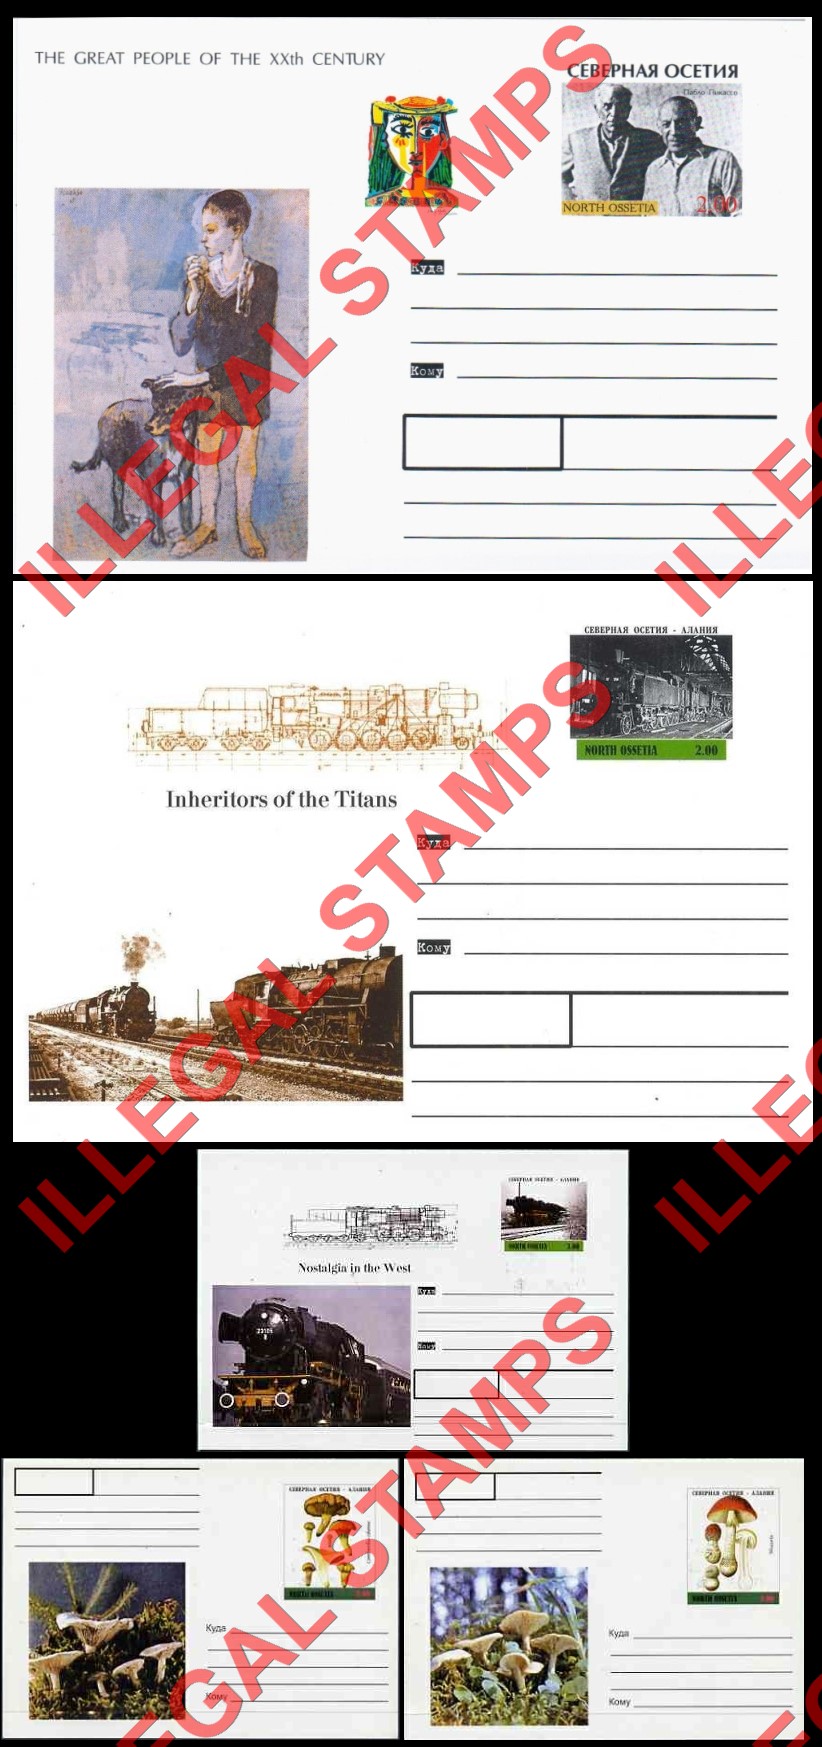 North Ossetia 1999 Counterfeit Illegal Stamp Postcards